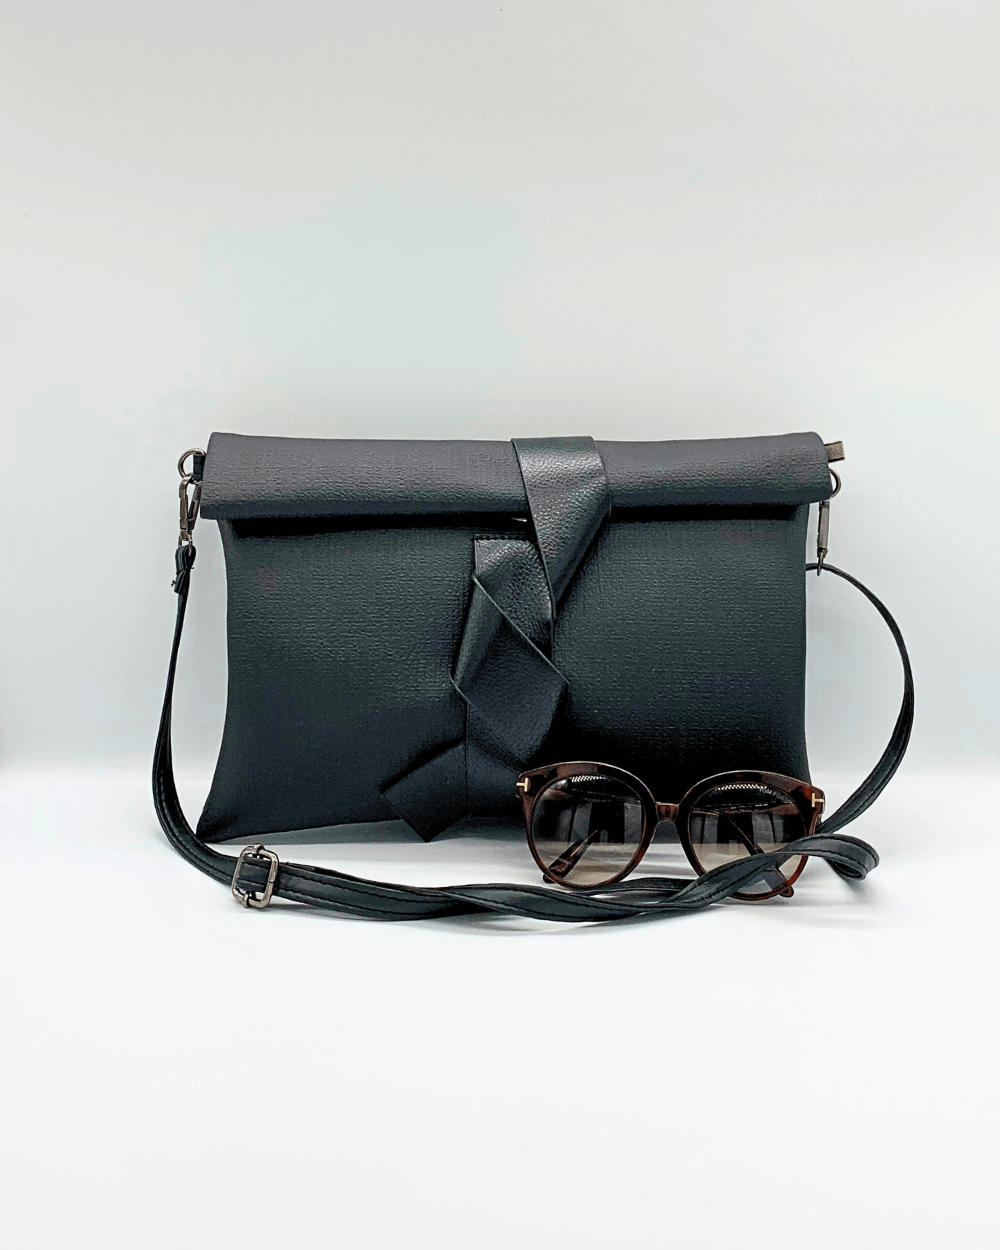 A fun cross body bag. H 30 cm x L 2 cm x W 21 cm - Faux leather; fully-lined interior - Ribbon front closure - Polished silver-toned hardware - Single detachable handle